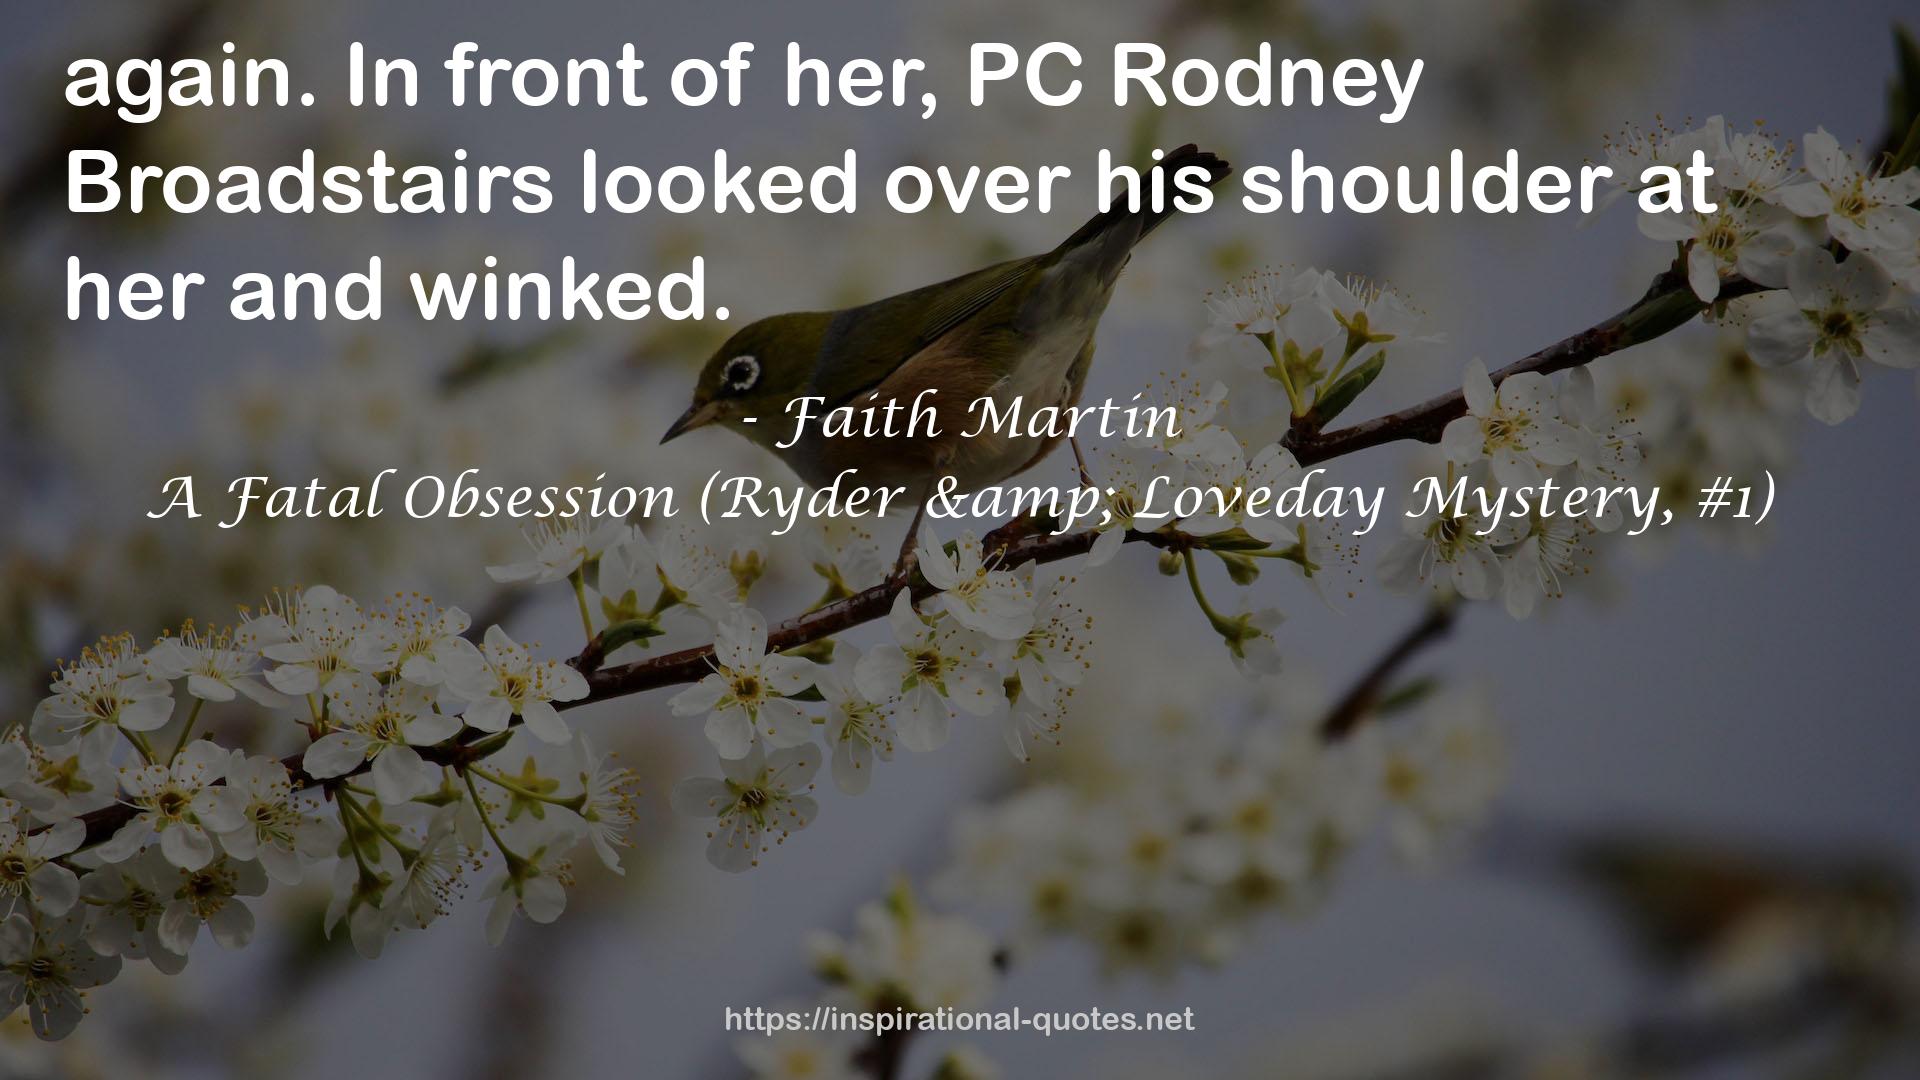 A Fatal Obsession (Ryder & Loveday Mystery, #1) QUOTES